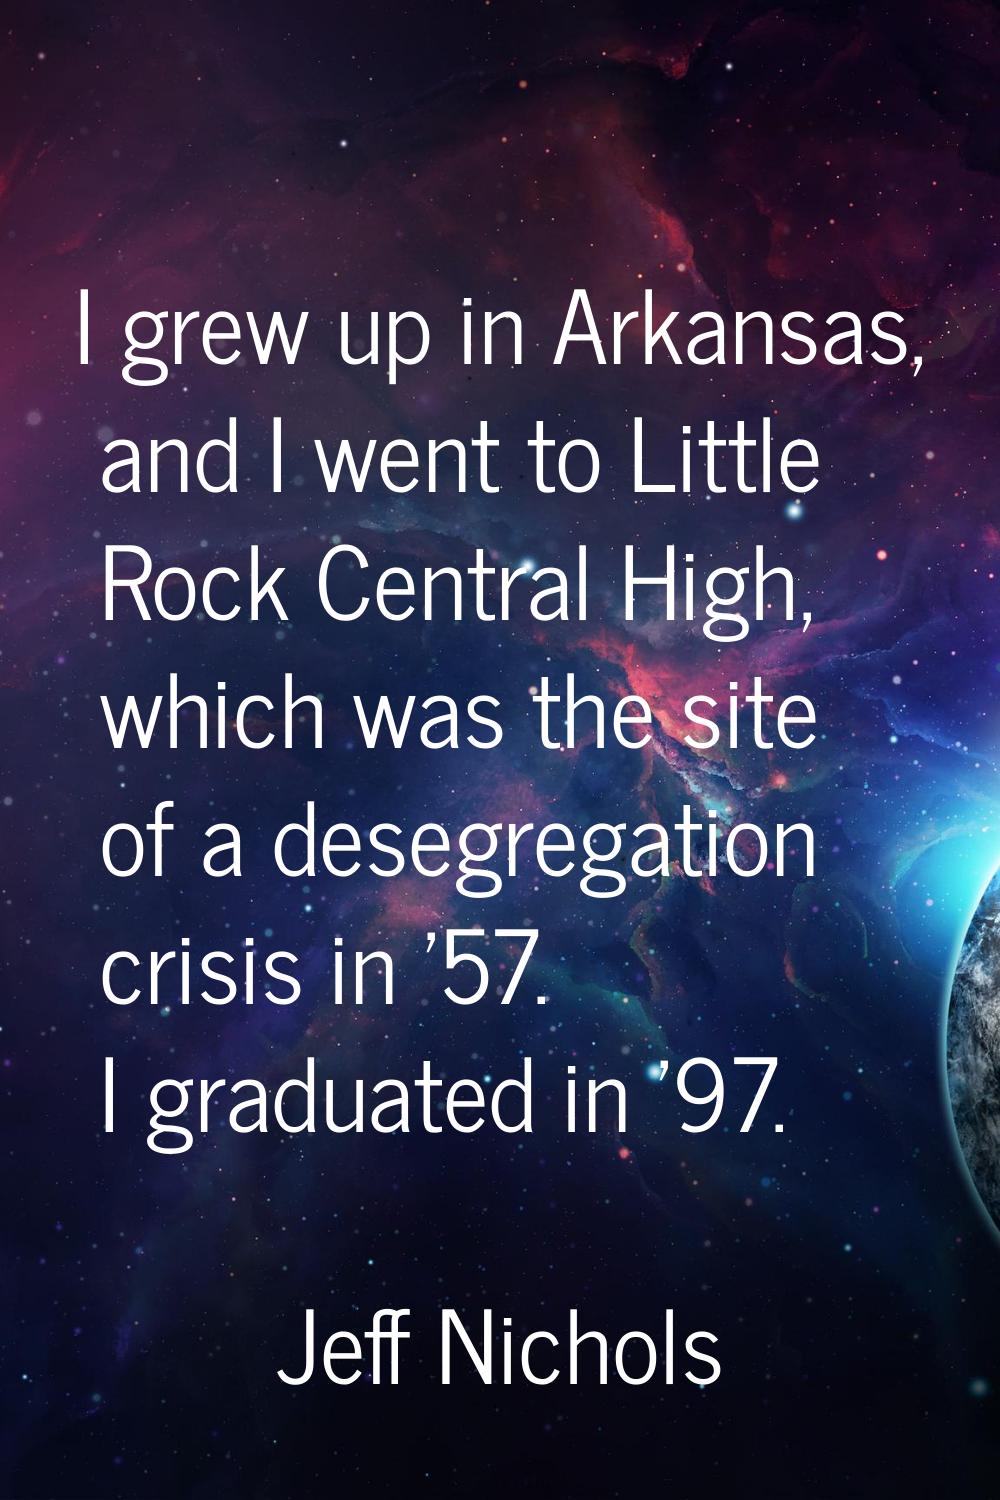 I grew up in Arkansas, and I went to Little Rock Central High, which was the site of a desegregatio